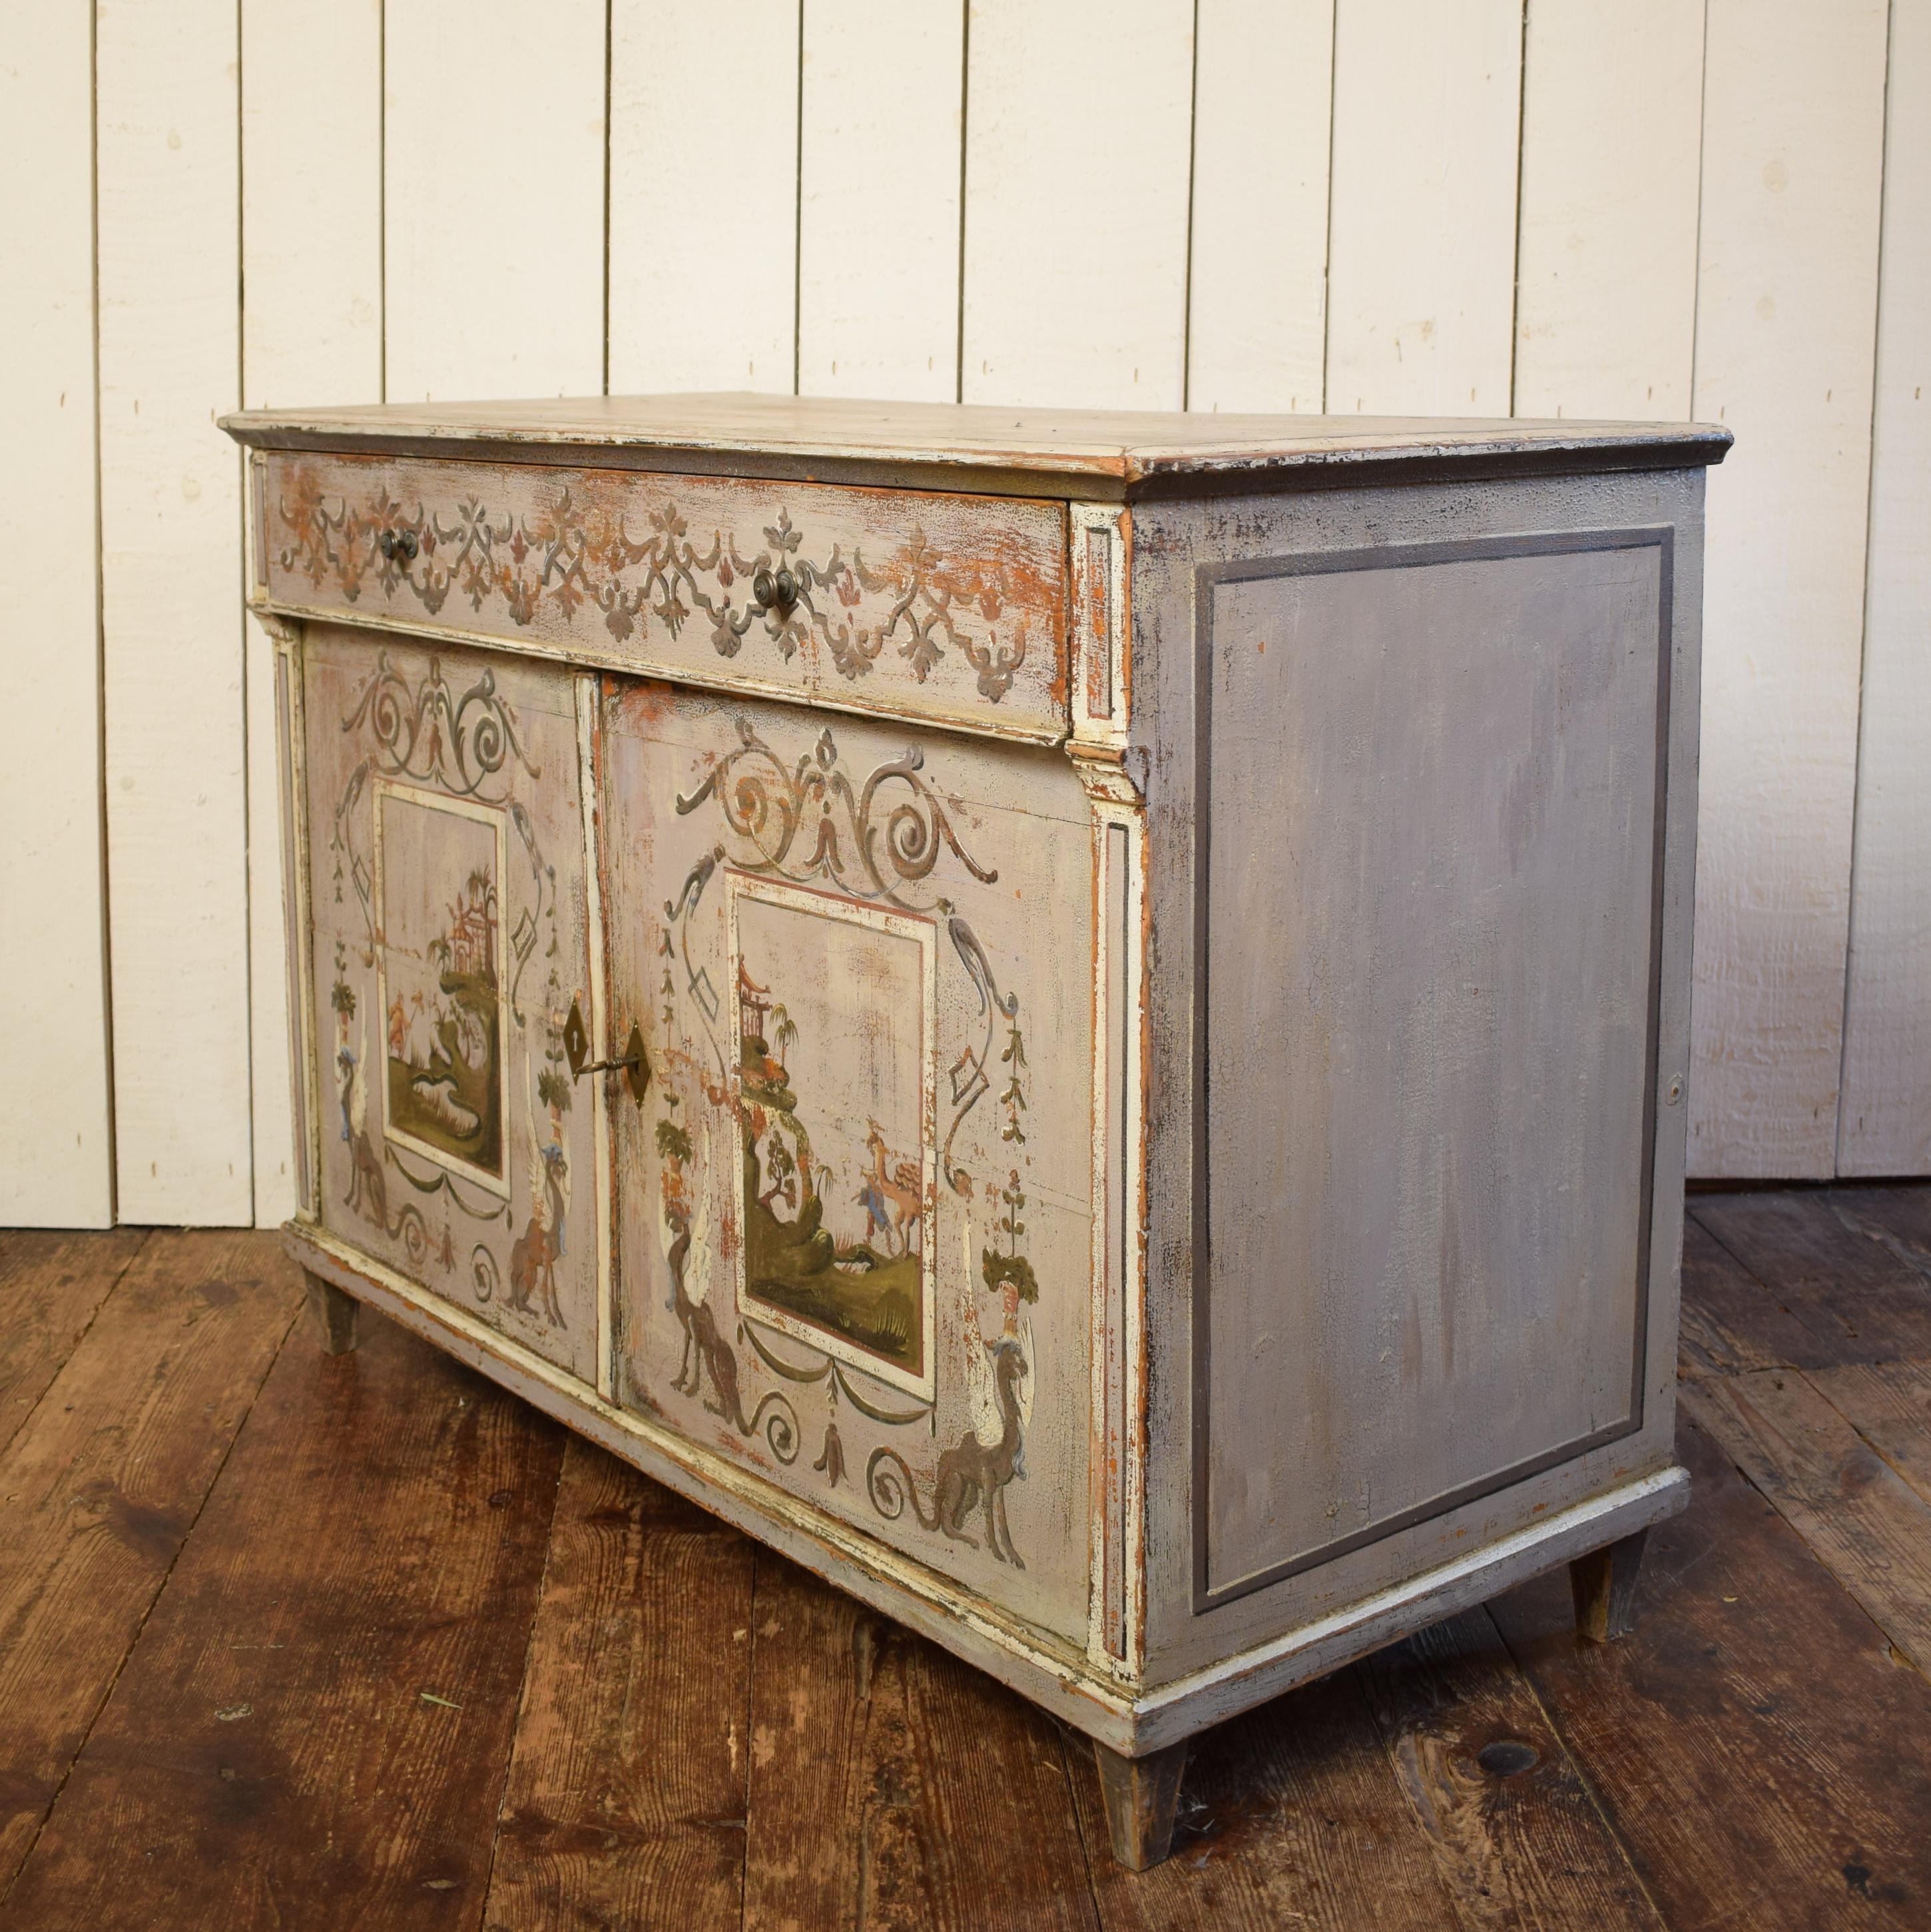 This 19th century pine cupboard is painted with figural and Chinese themes.
It is the original surface and the painting has very beautiful details.
The cupboard has one drawer and two doors. Inside it has some blue paint. A very lovely and